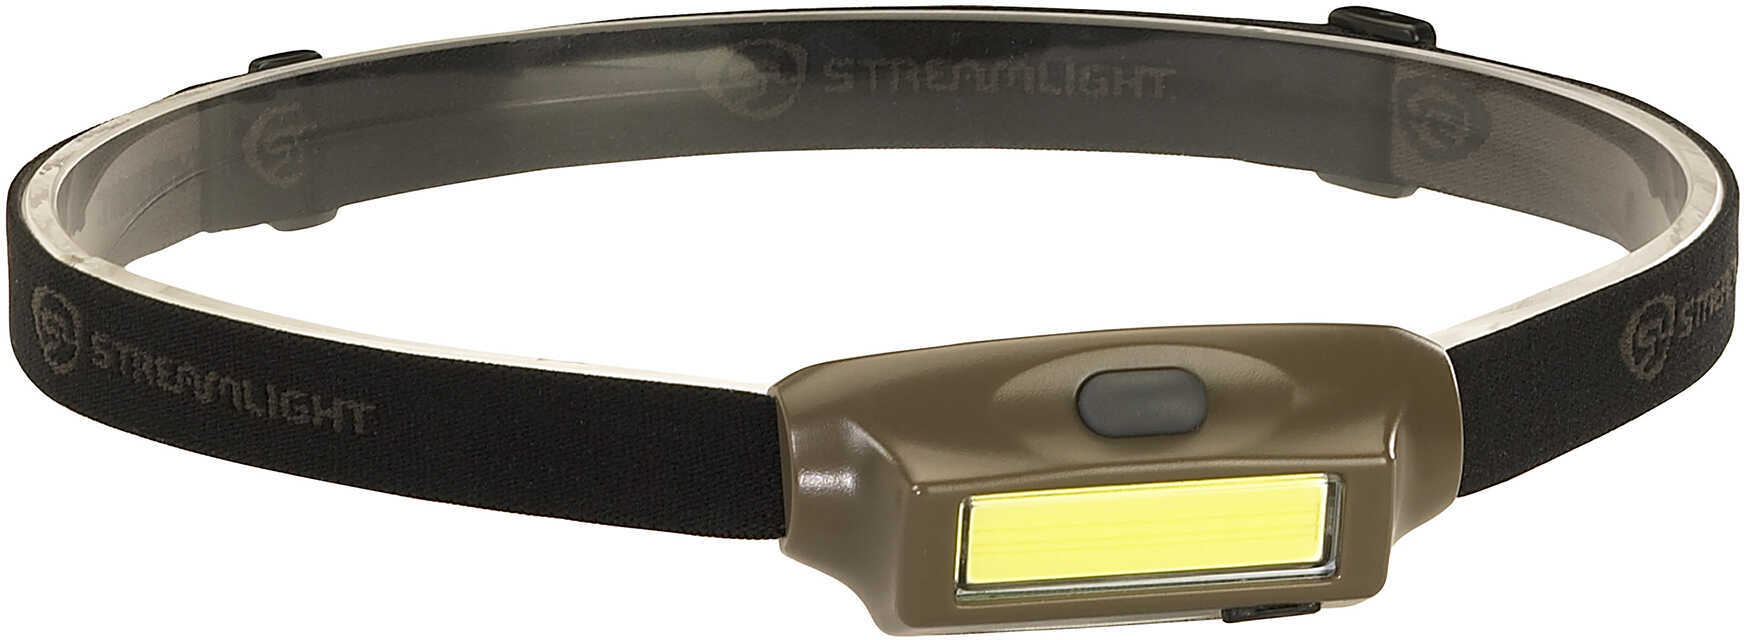 Streamlight Bandit Rechargeable Headlamp Coyote Green LED and White Light 180 Lumens Model: 61706